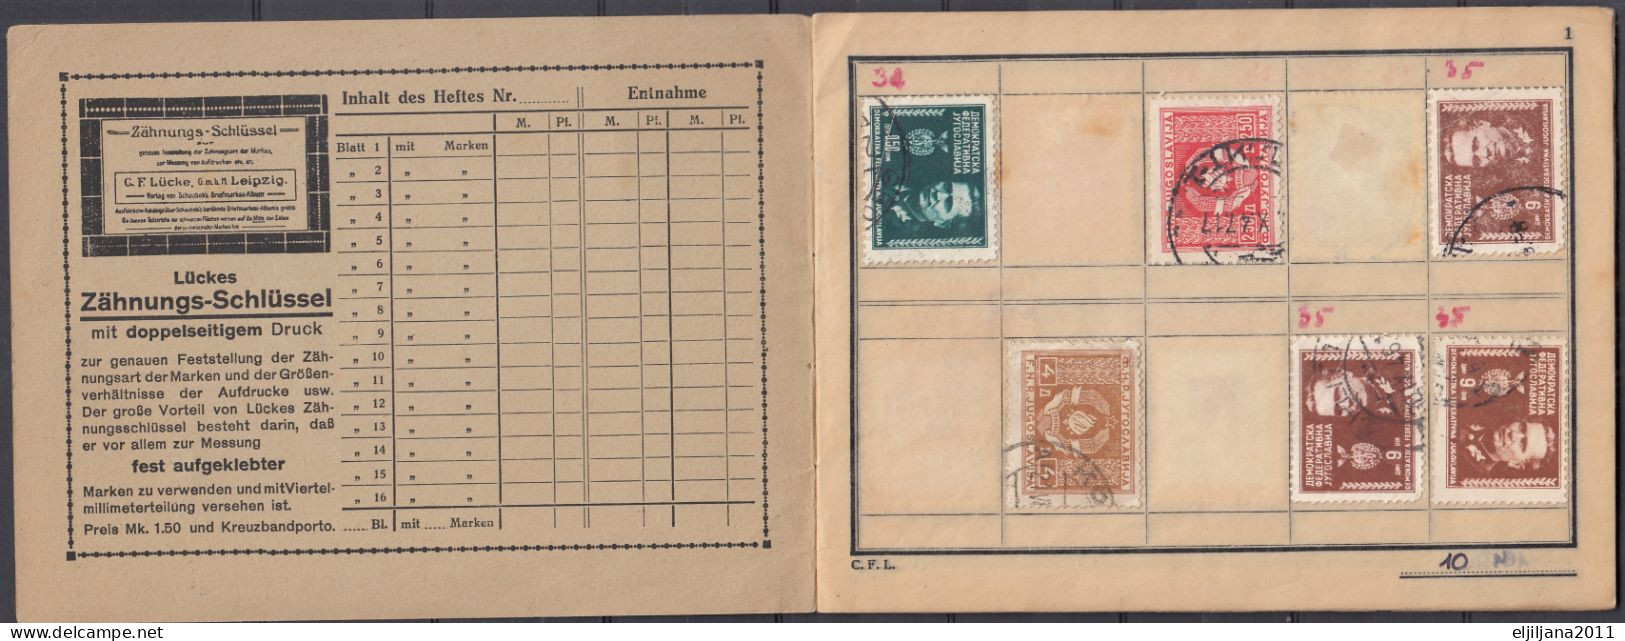 ⁕ Yugoslavia ⁕ Old Album - Booklet With Stamps (9 Blank Sheets) 14.5 X 11 Cm ⁕ 74 Used Stamps - Tito / Partisans - Scan - Colecciones & Series